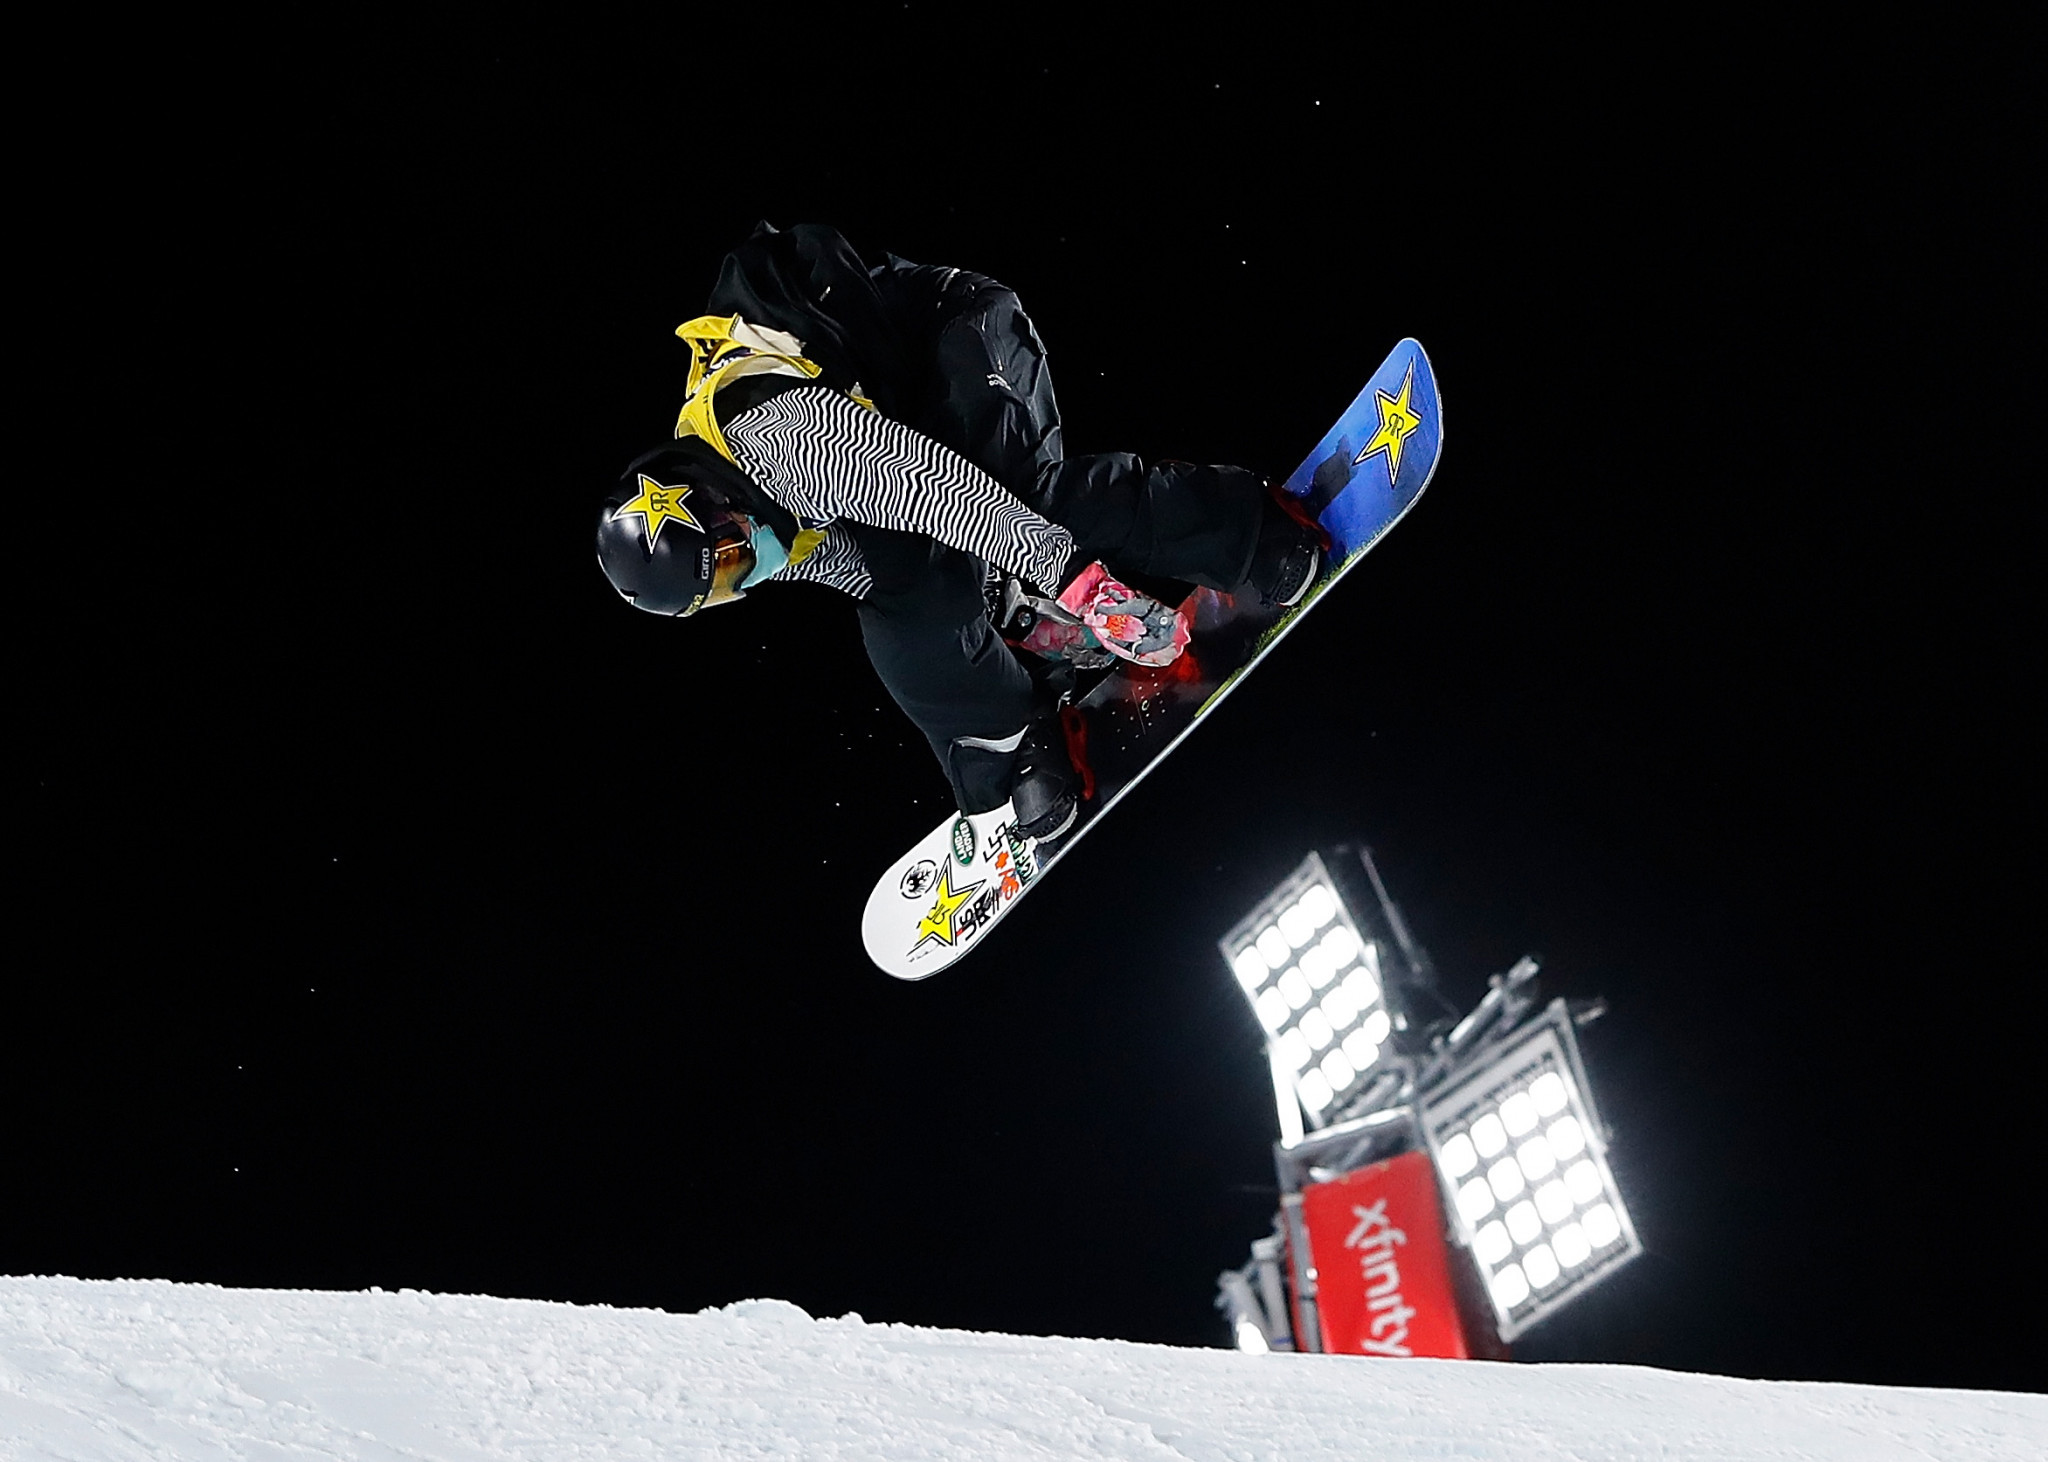 Chris Corning of the United States headlines the men's big air event at the FIS Snowboard World Cup event in Kreischberg ©Getty Images